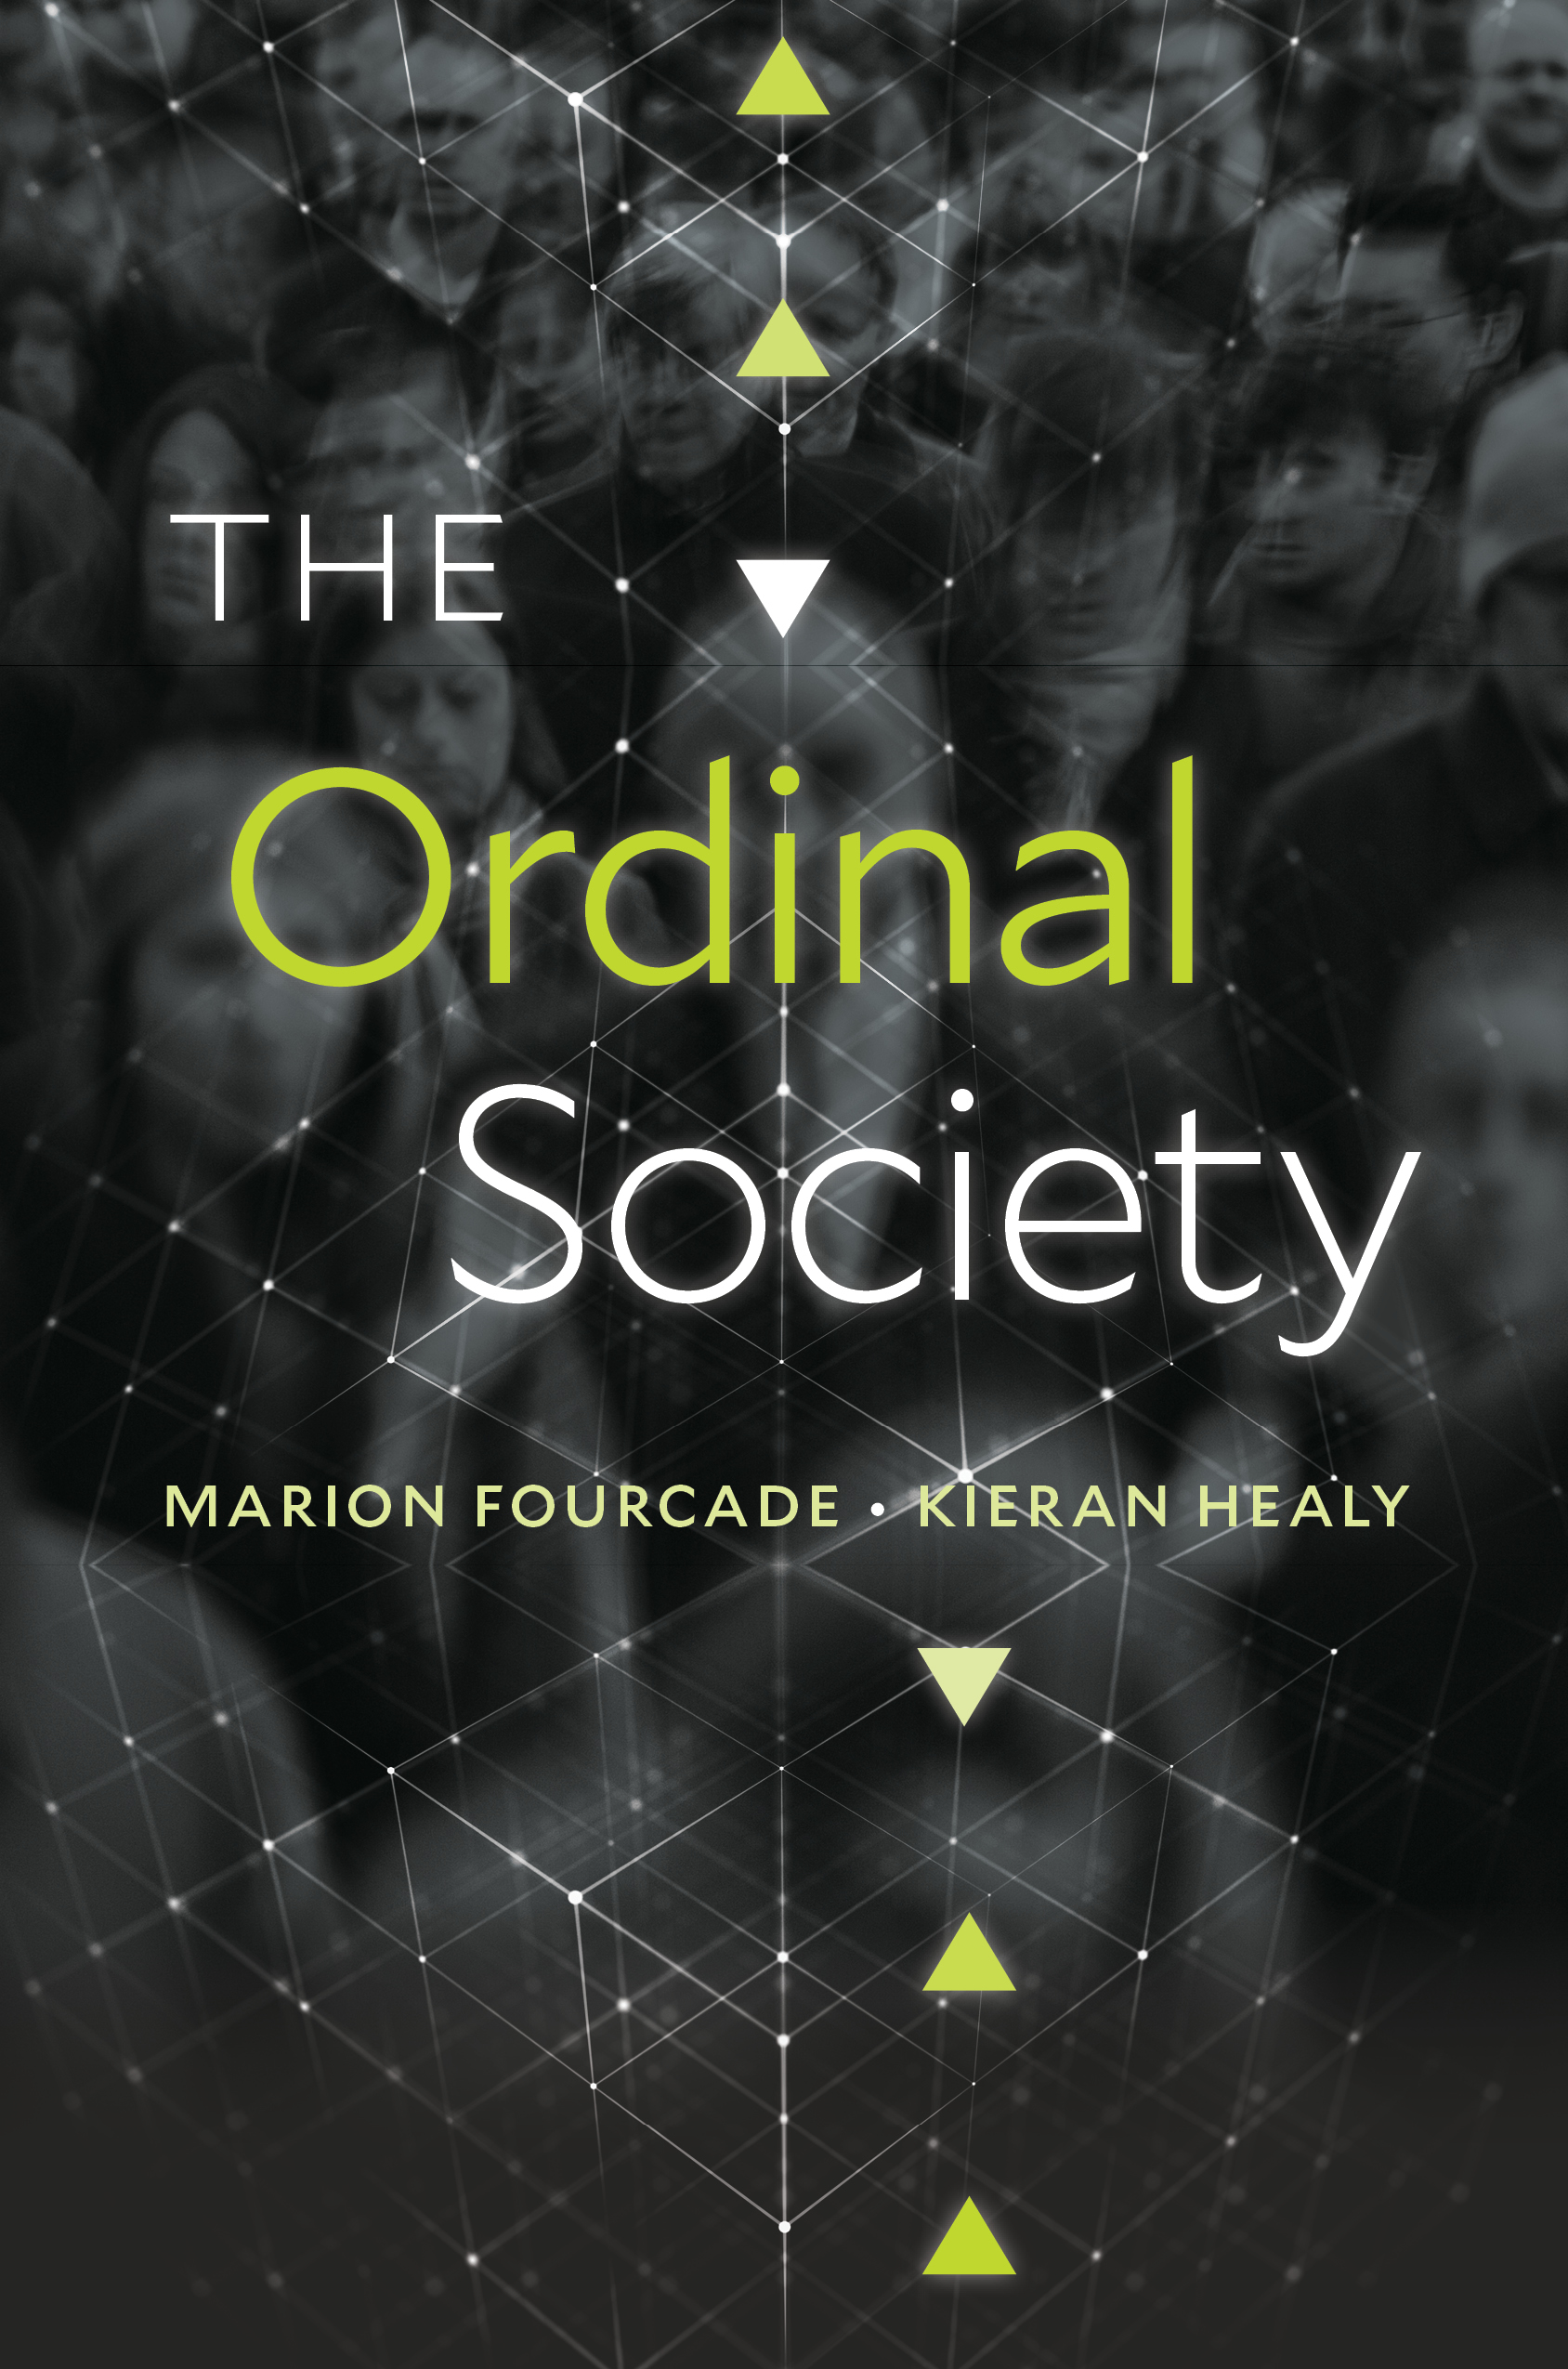 book cover saying "the ordinal society"